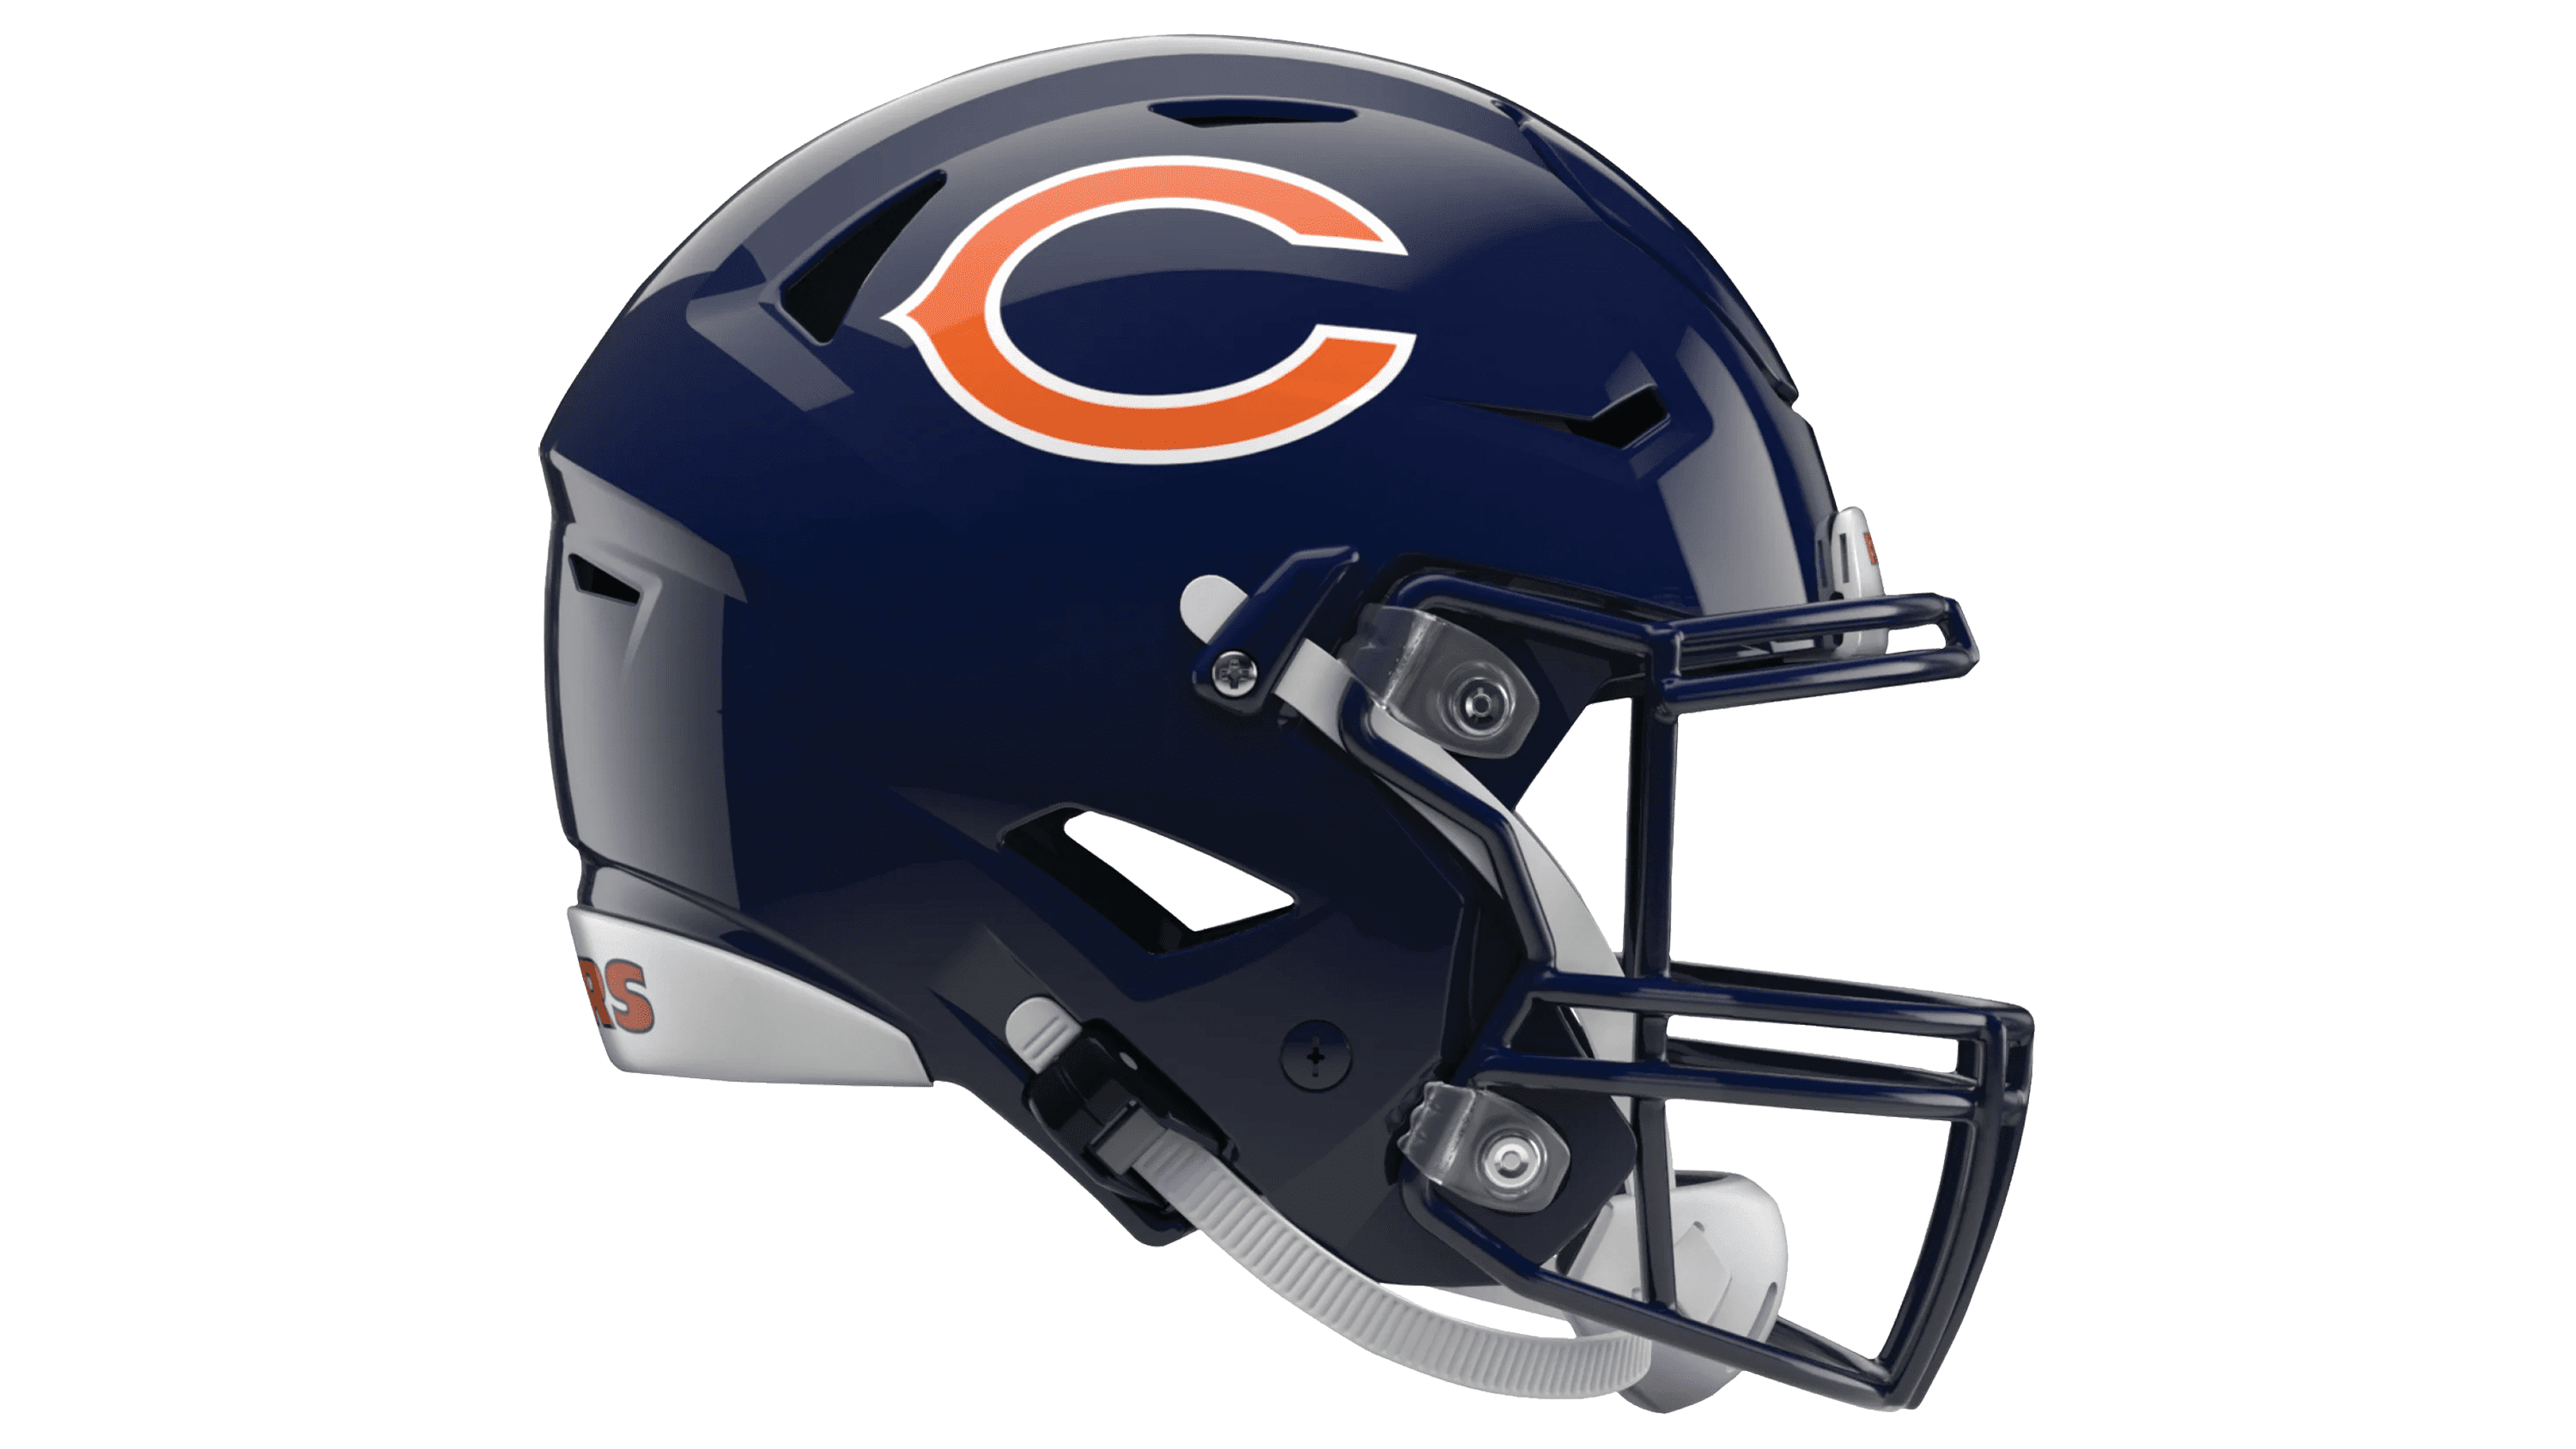 Chicago Bears Logo and symbol, meaning, history, PNG, brand